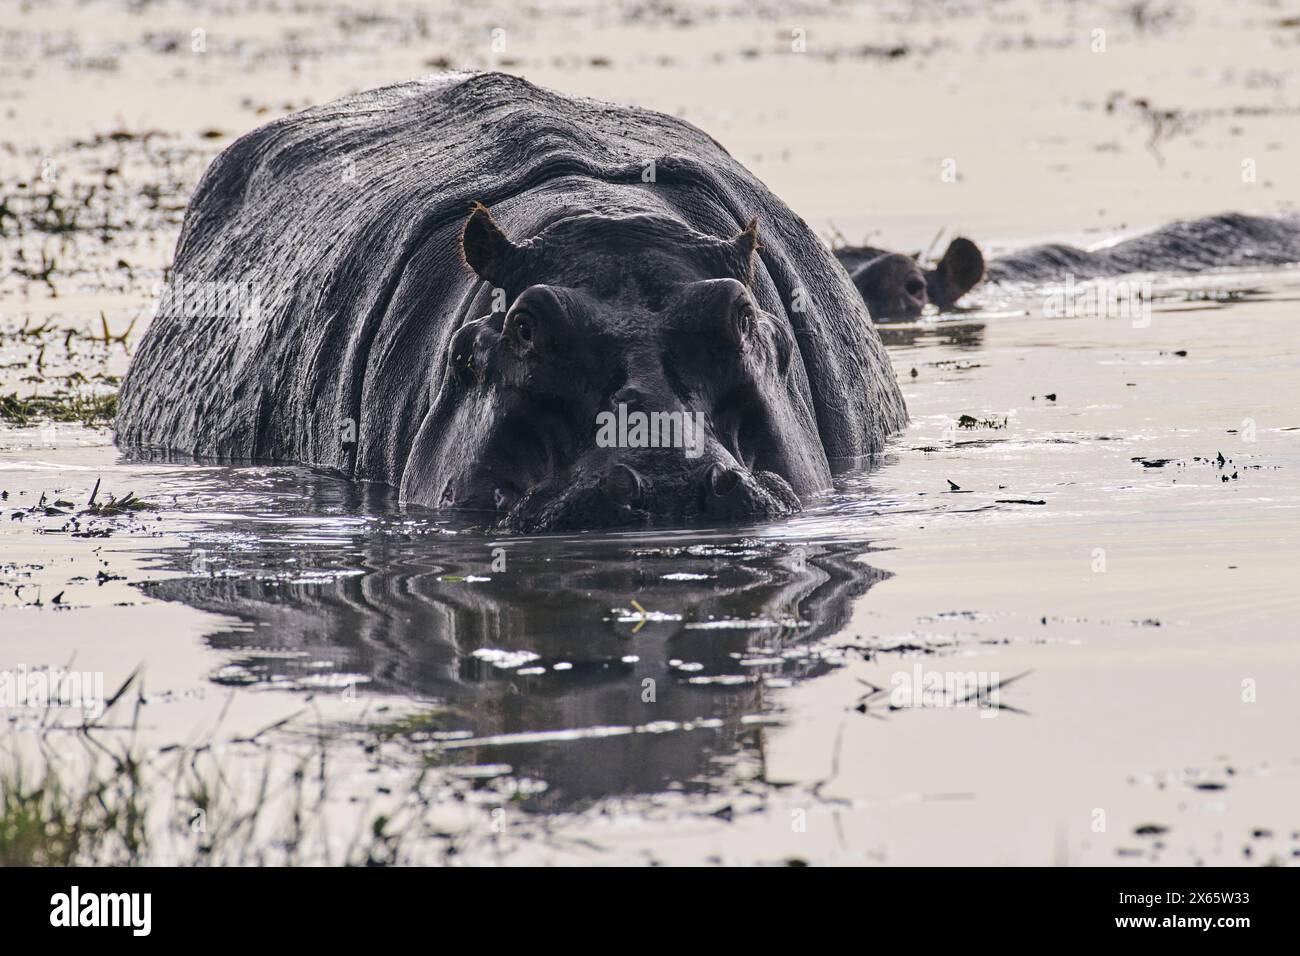 A massive hippo wades in a small pond in Amboseli National Park Stock Photo